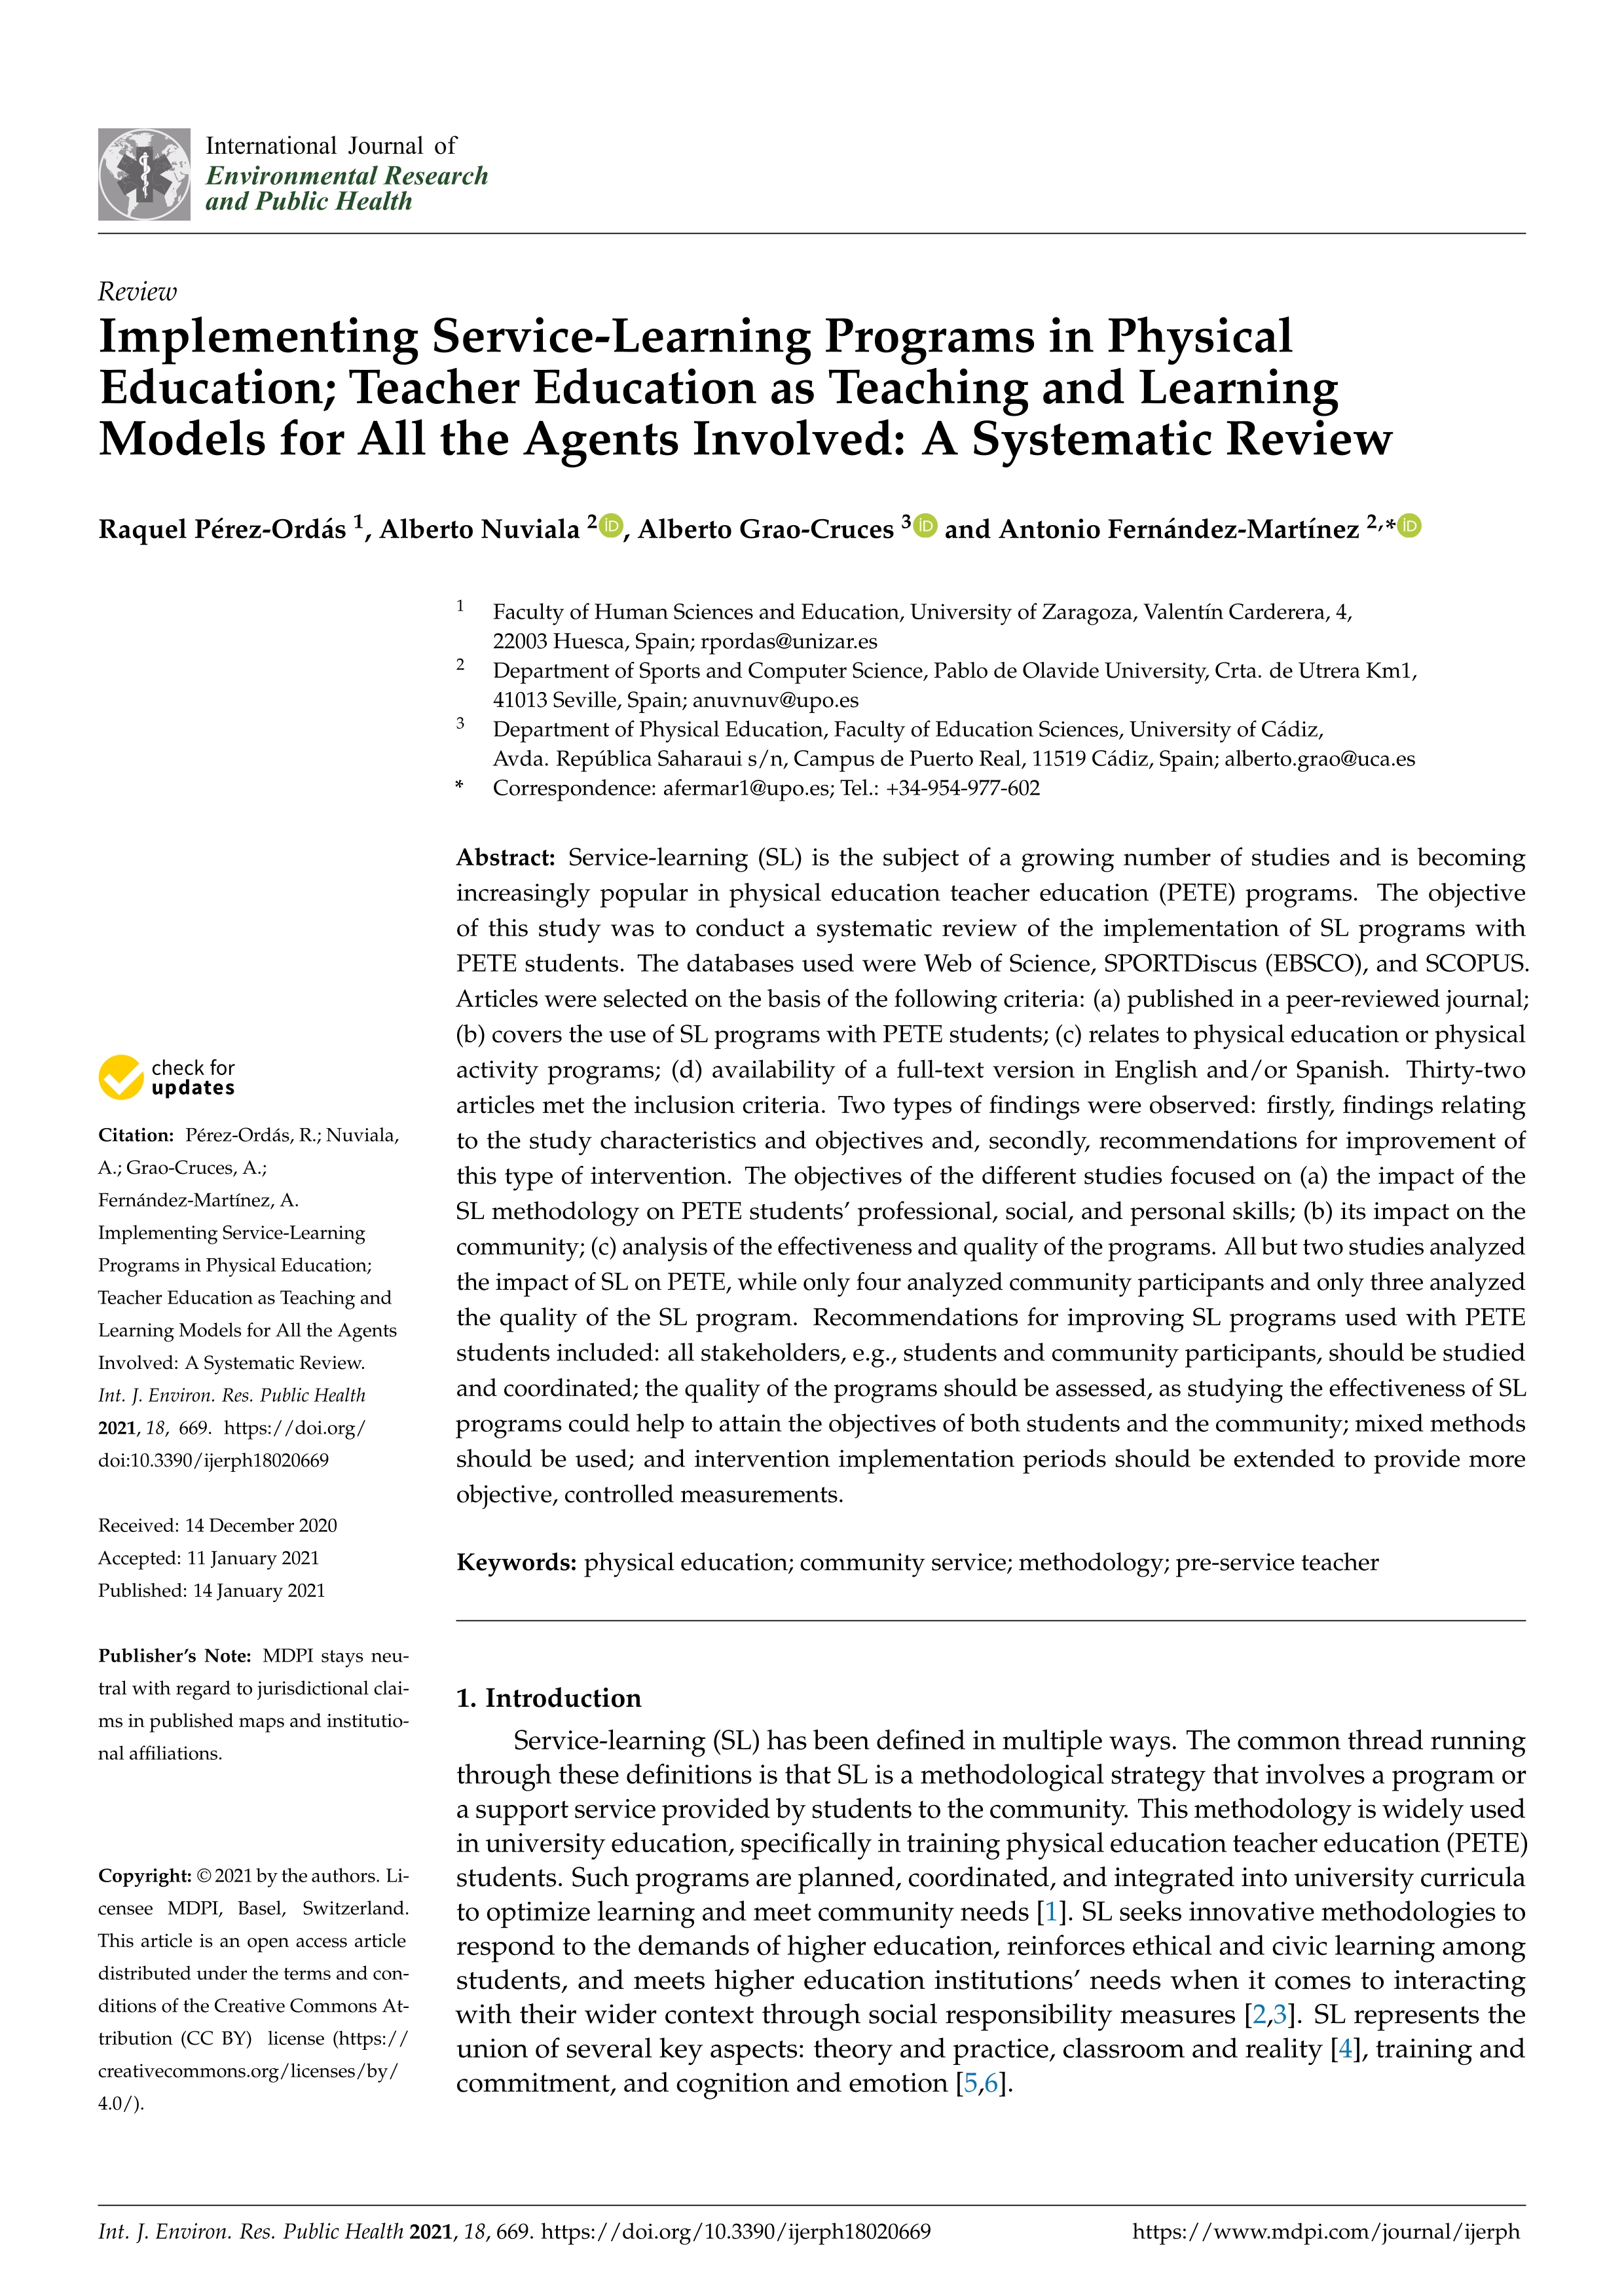 Implementing service-learning programs in physical education; teacher education as teaching and learning models for all the agents involved: A systematic review